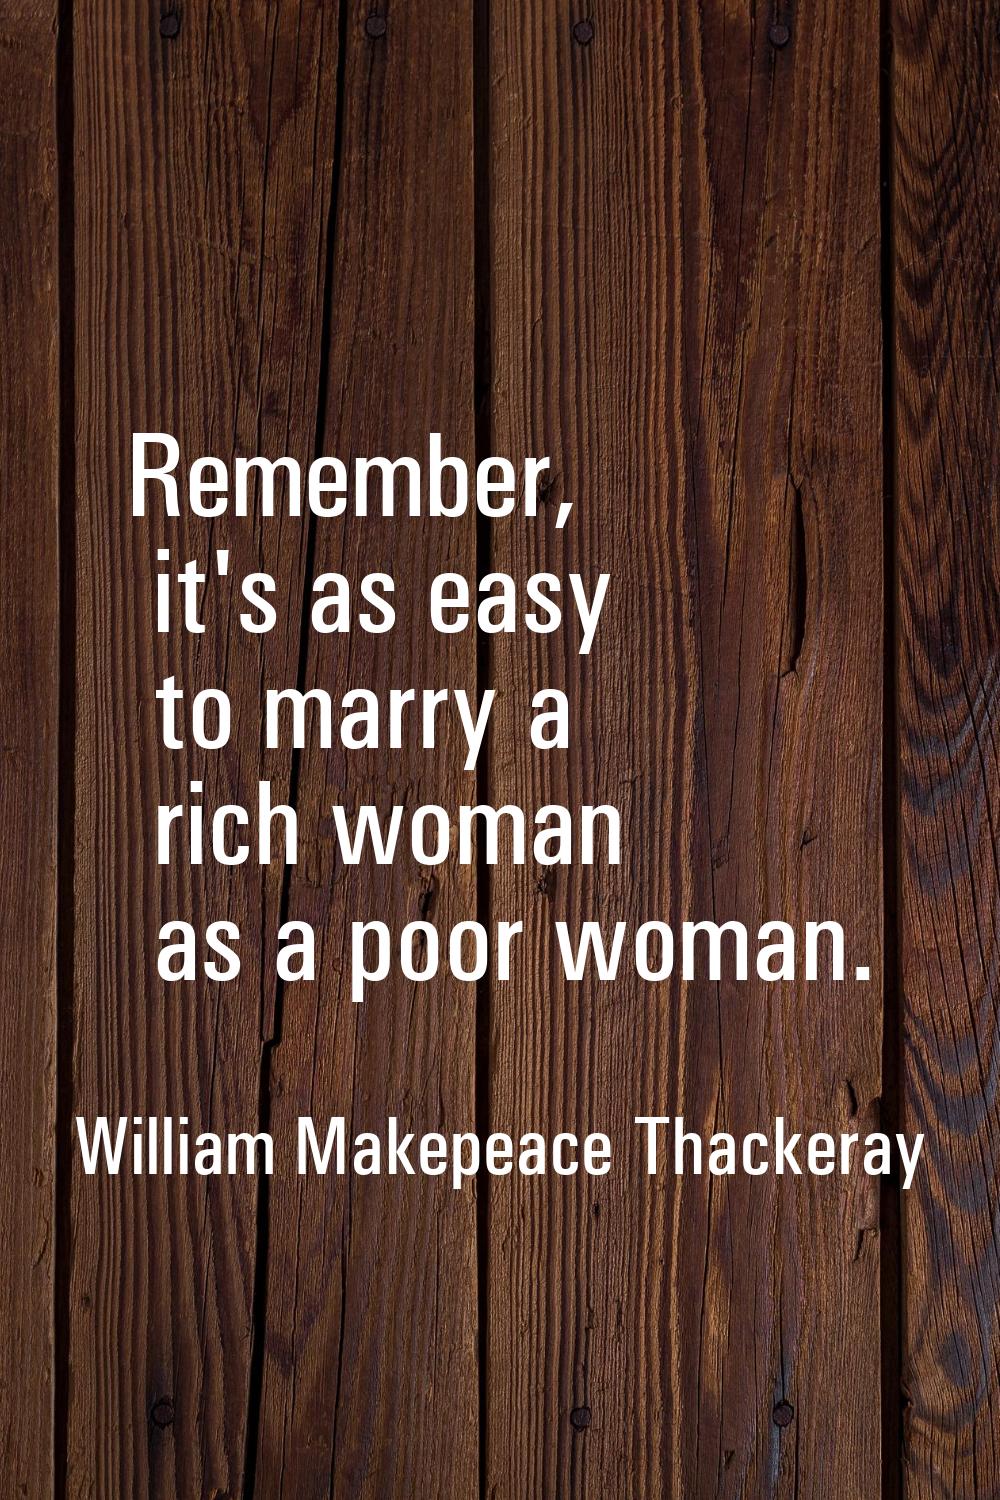 Remember, it's as easy to marry a rich woman as a poor woman.